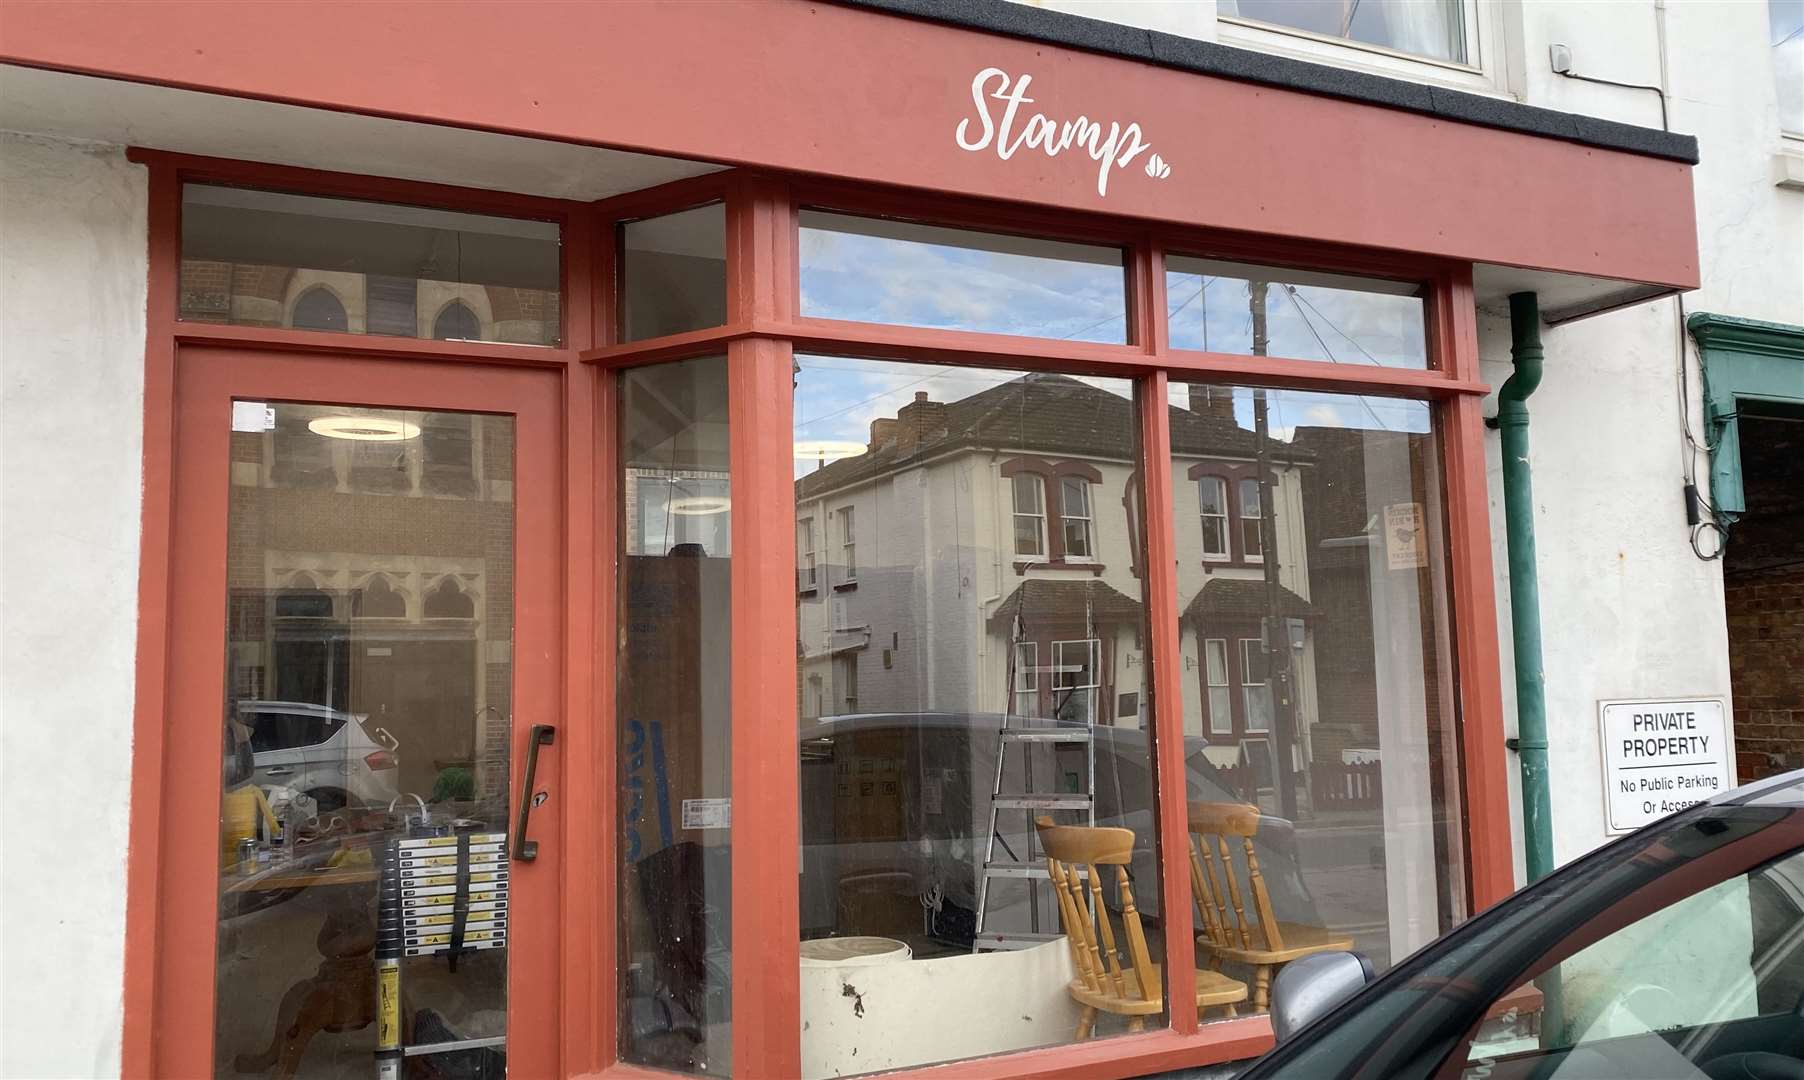 Stamp coffee shop in Staplehurst High Street. It's grand opening is happening on Saturday, November 6